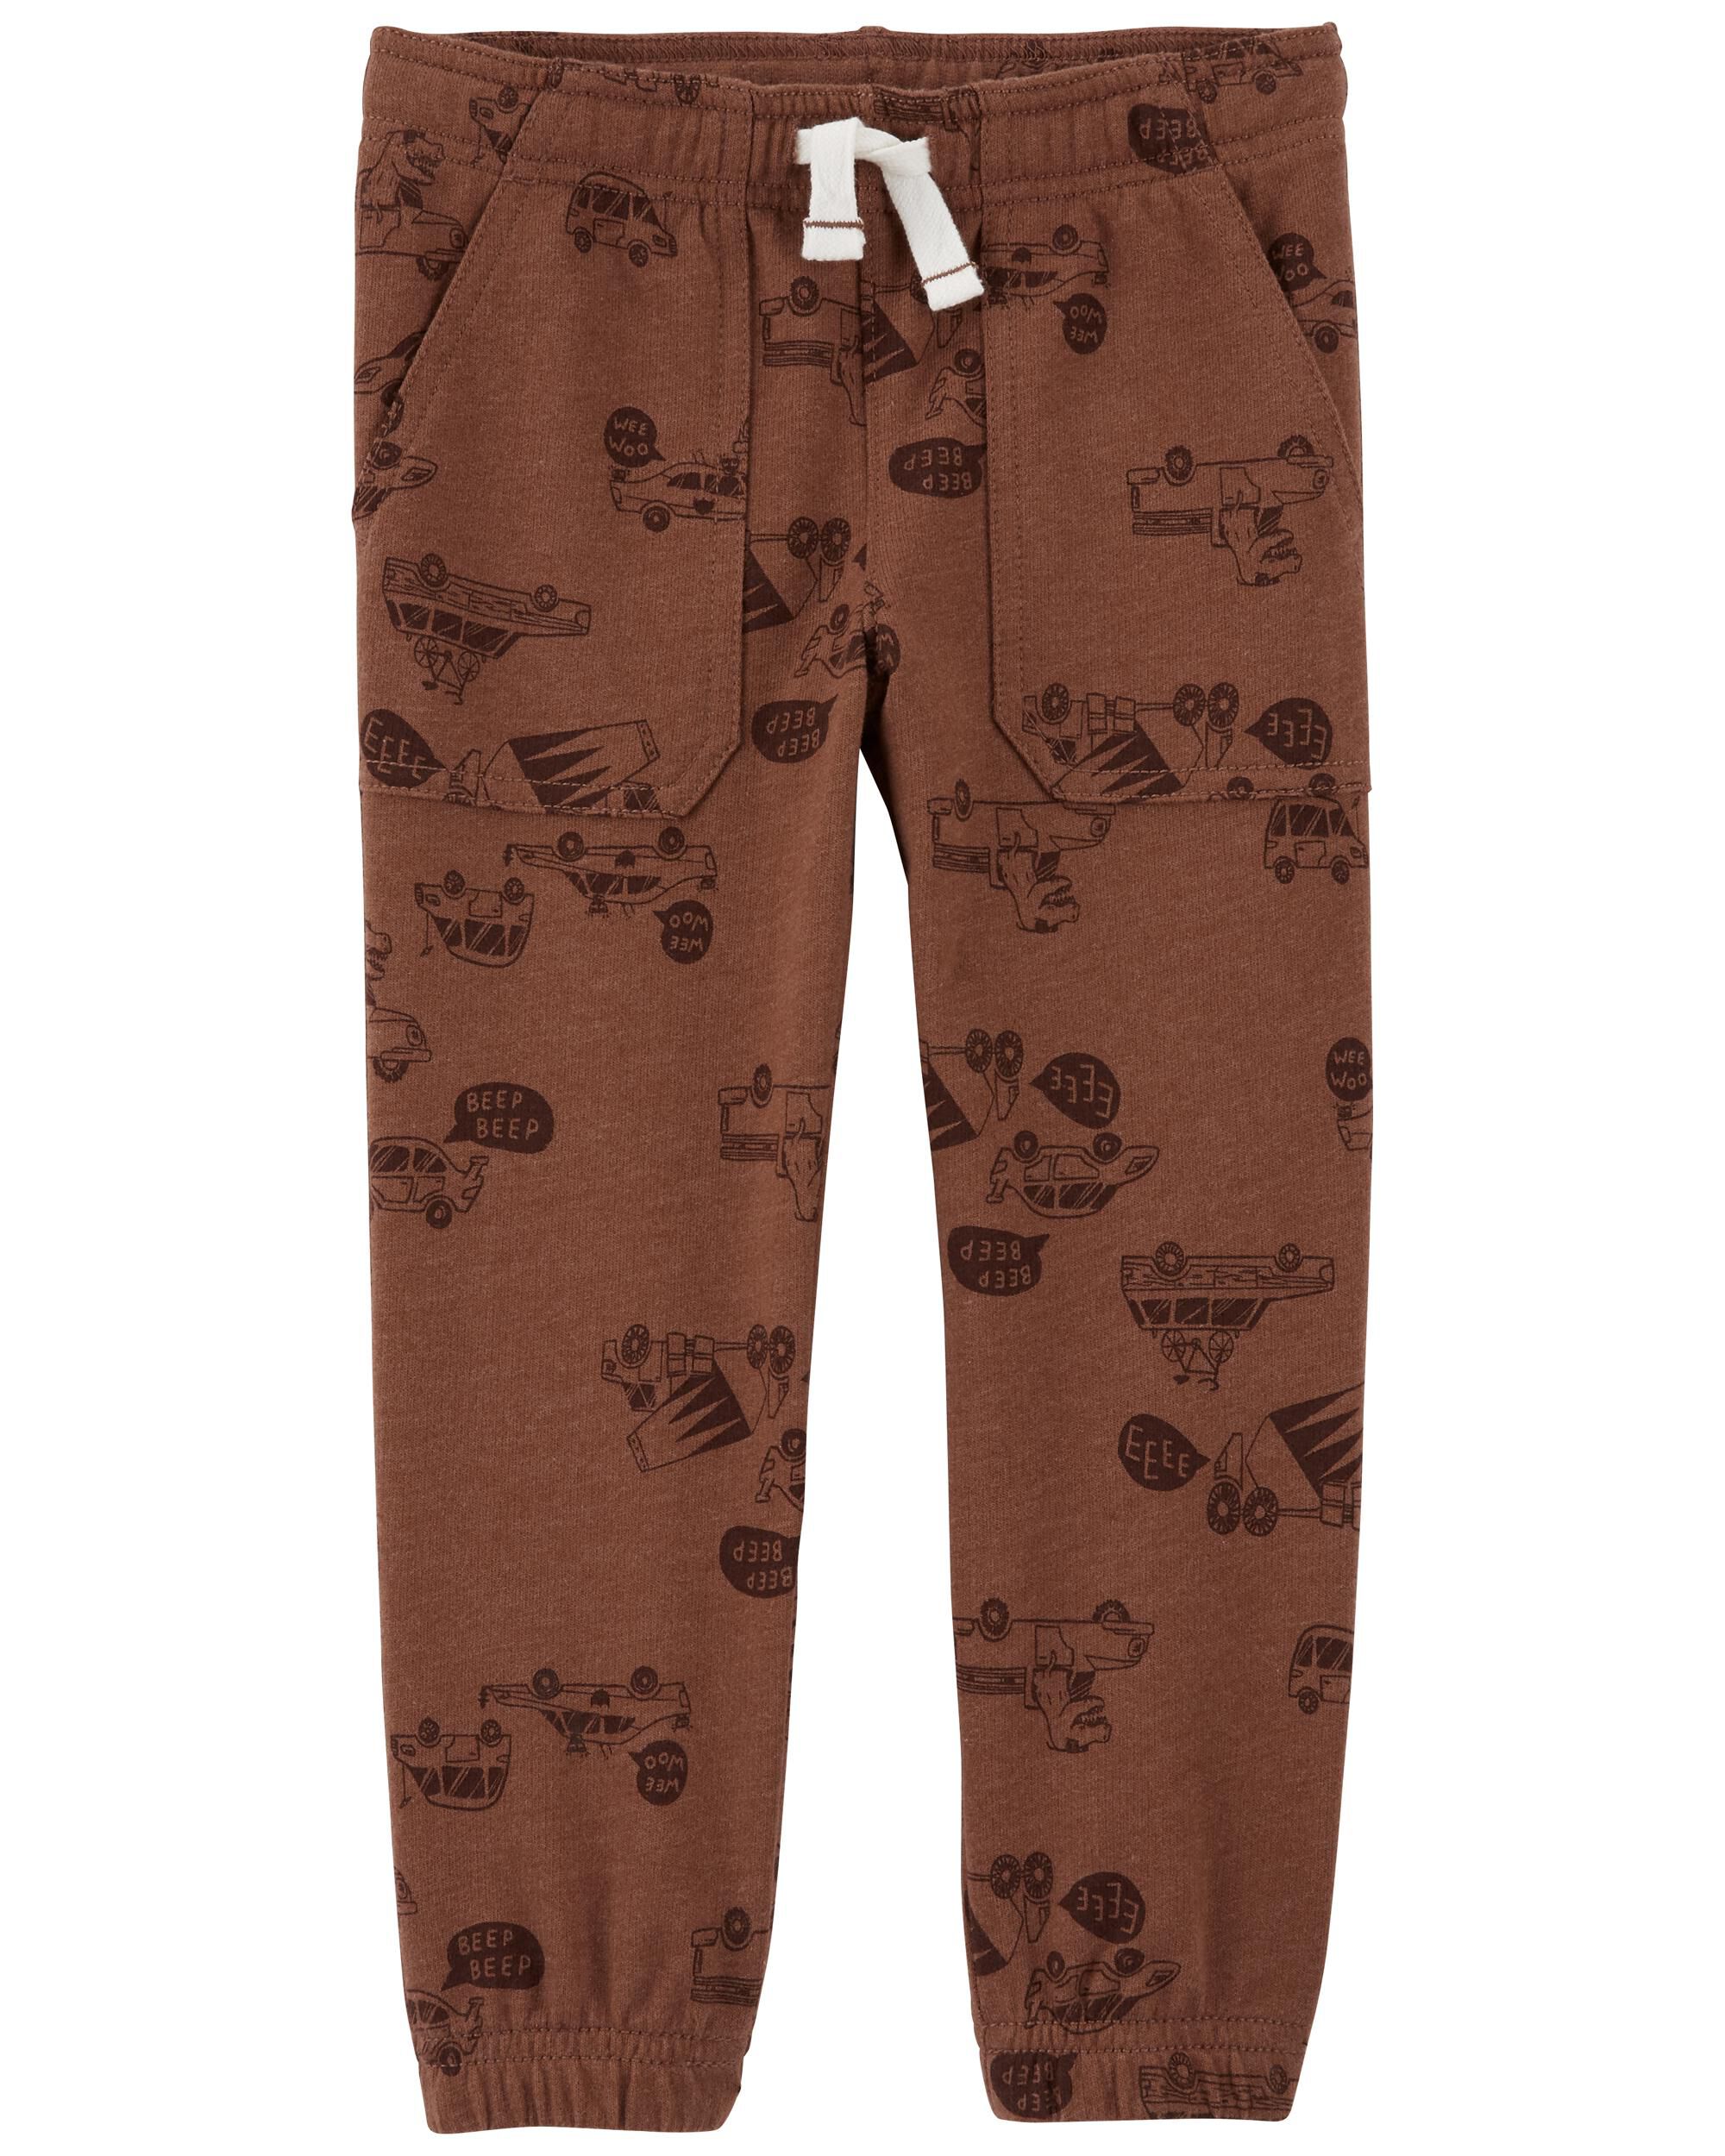 Carters Pull-On French Terry Pants